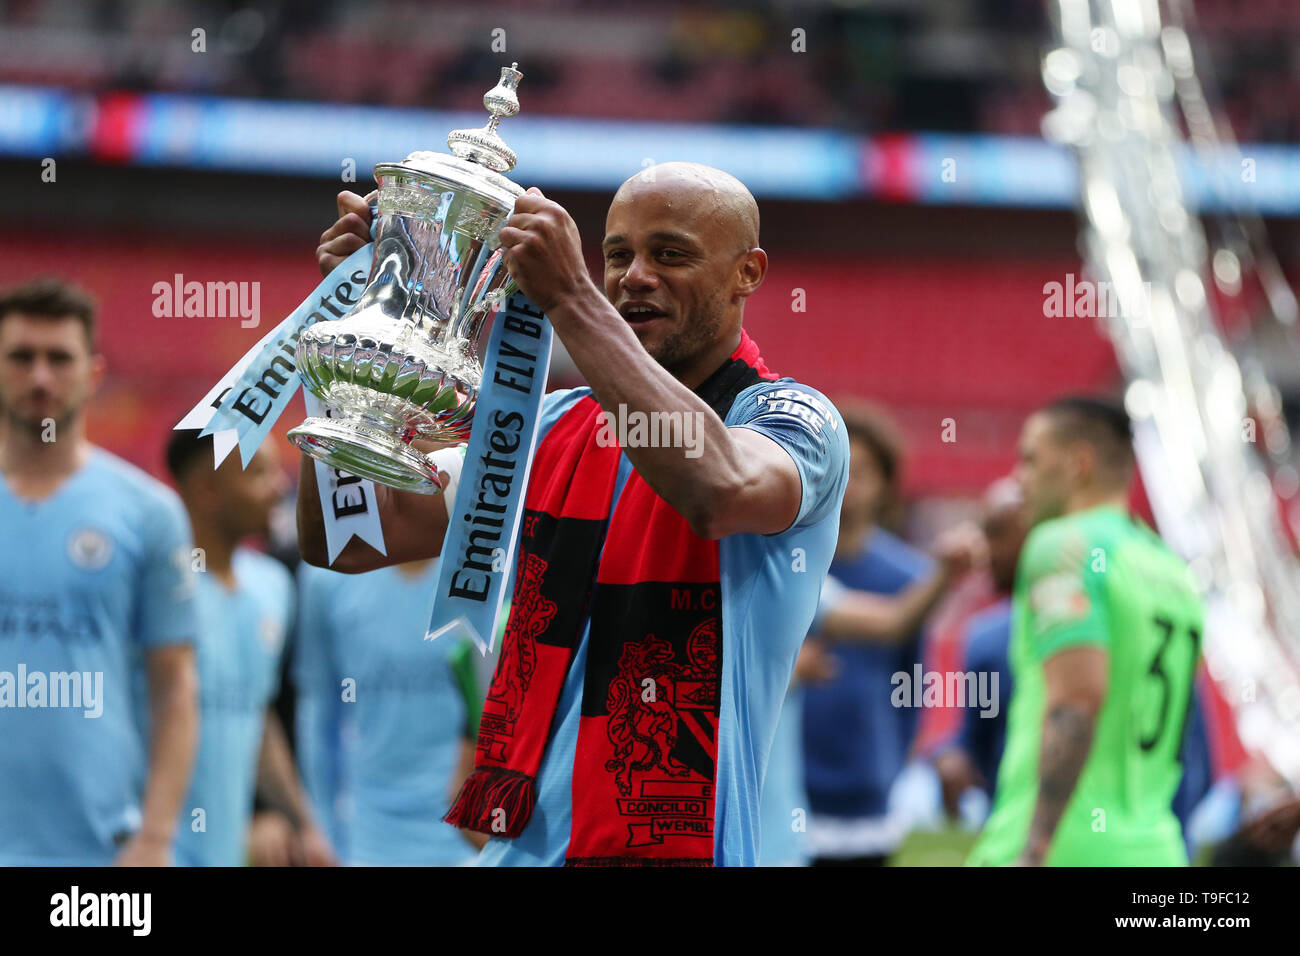 Vincent Kompany of Manchester city lifts the FA Cup trophy after the match